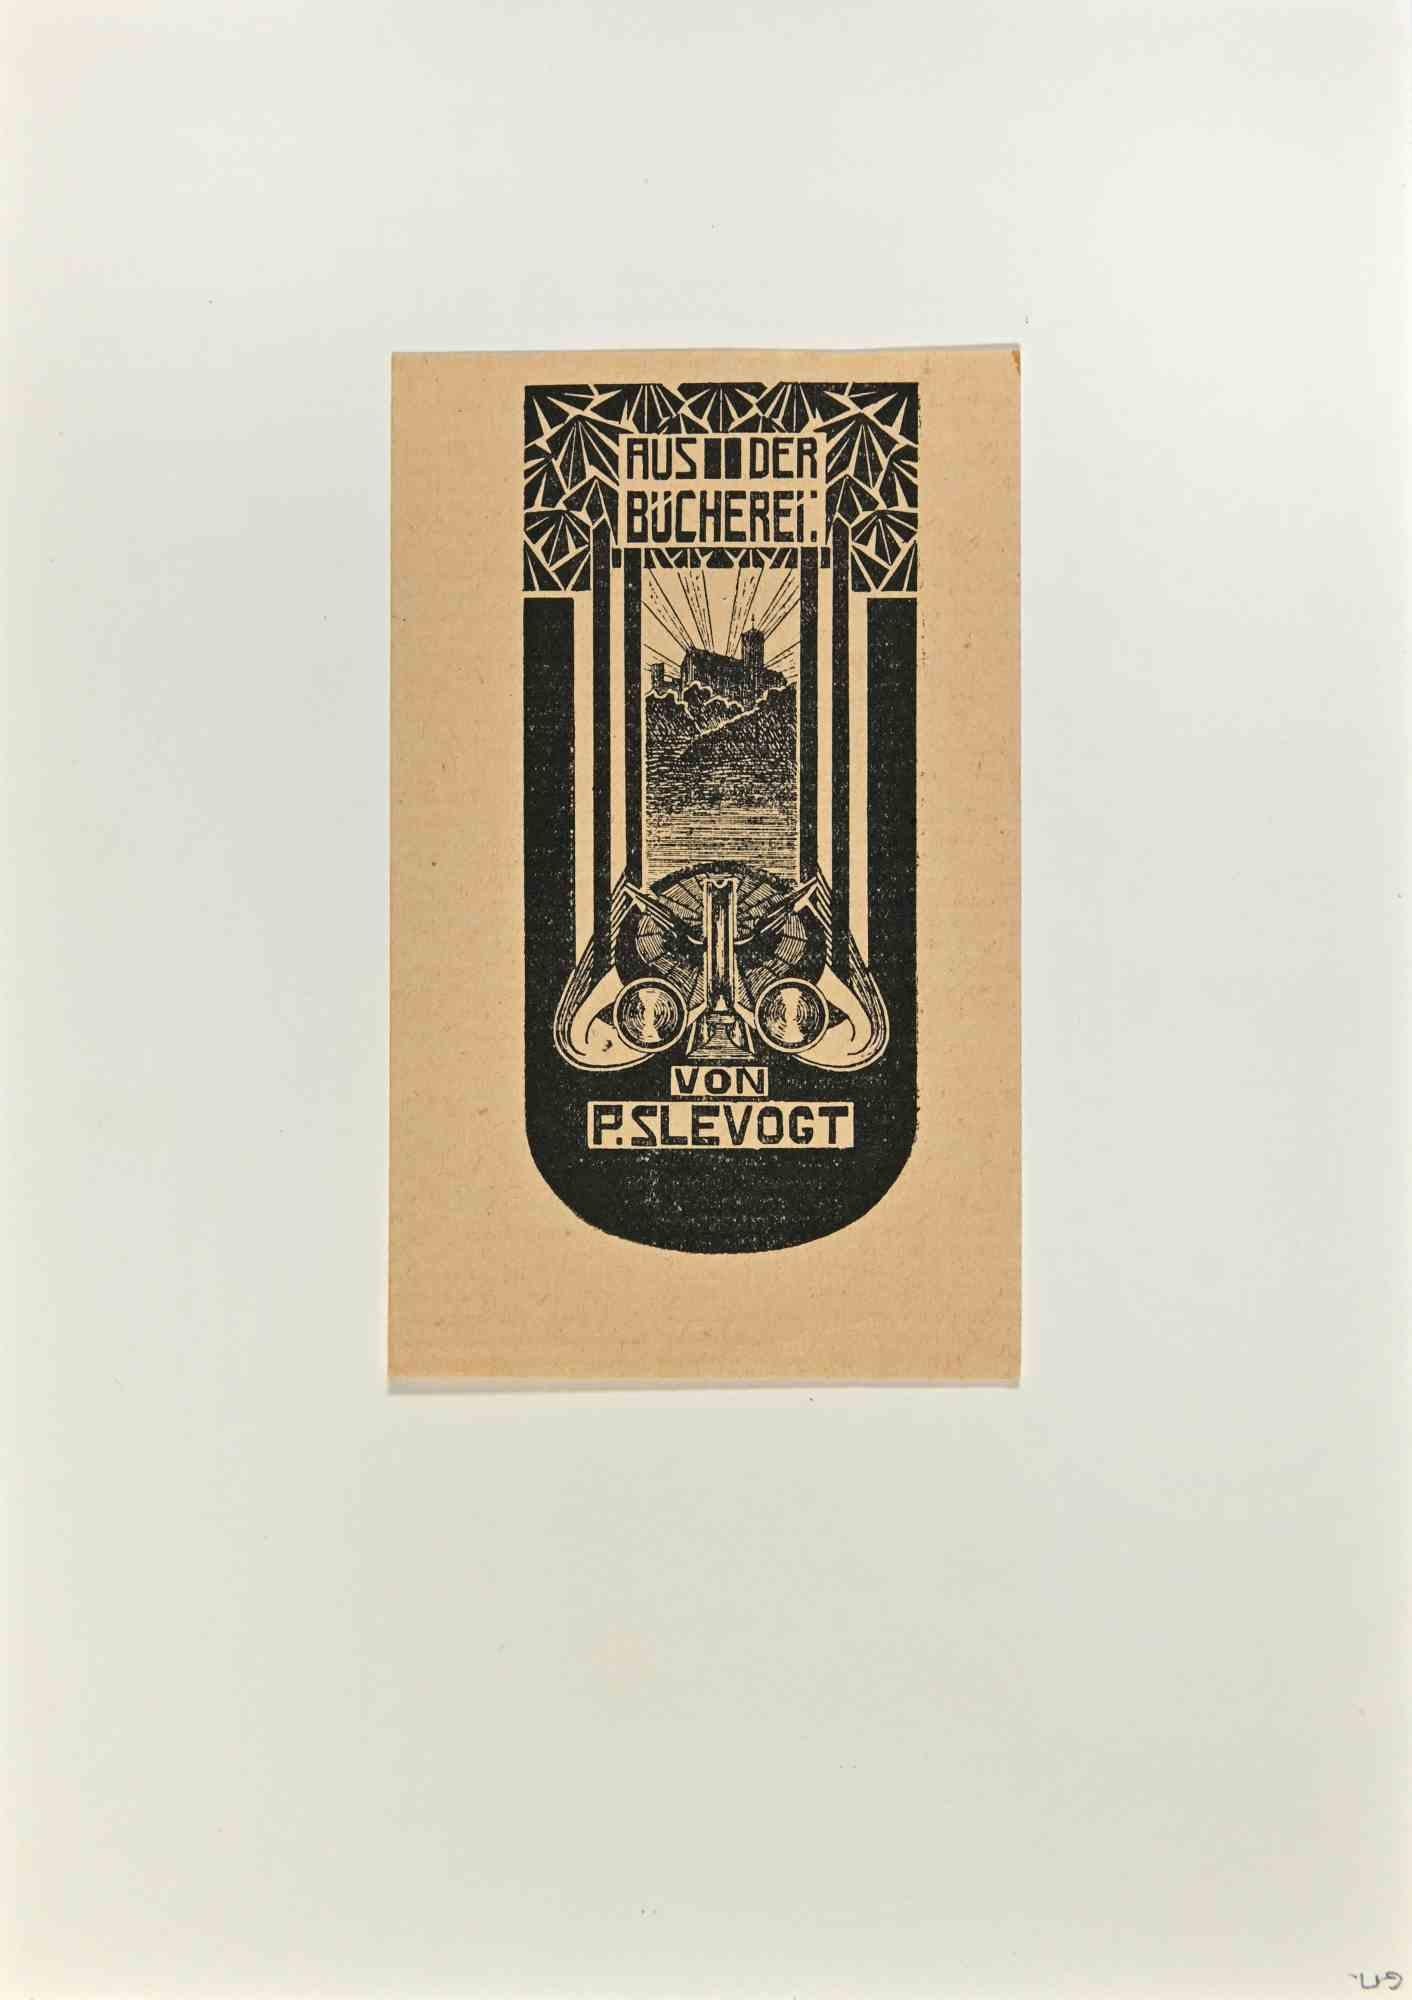  Ex Libris - P. Slevogt - Woodcut - Mid 20th Century - Art by Unknown